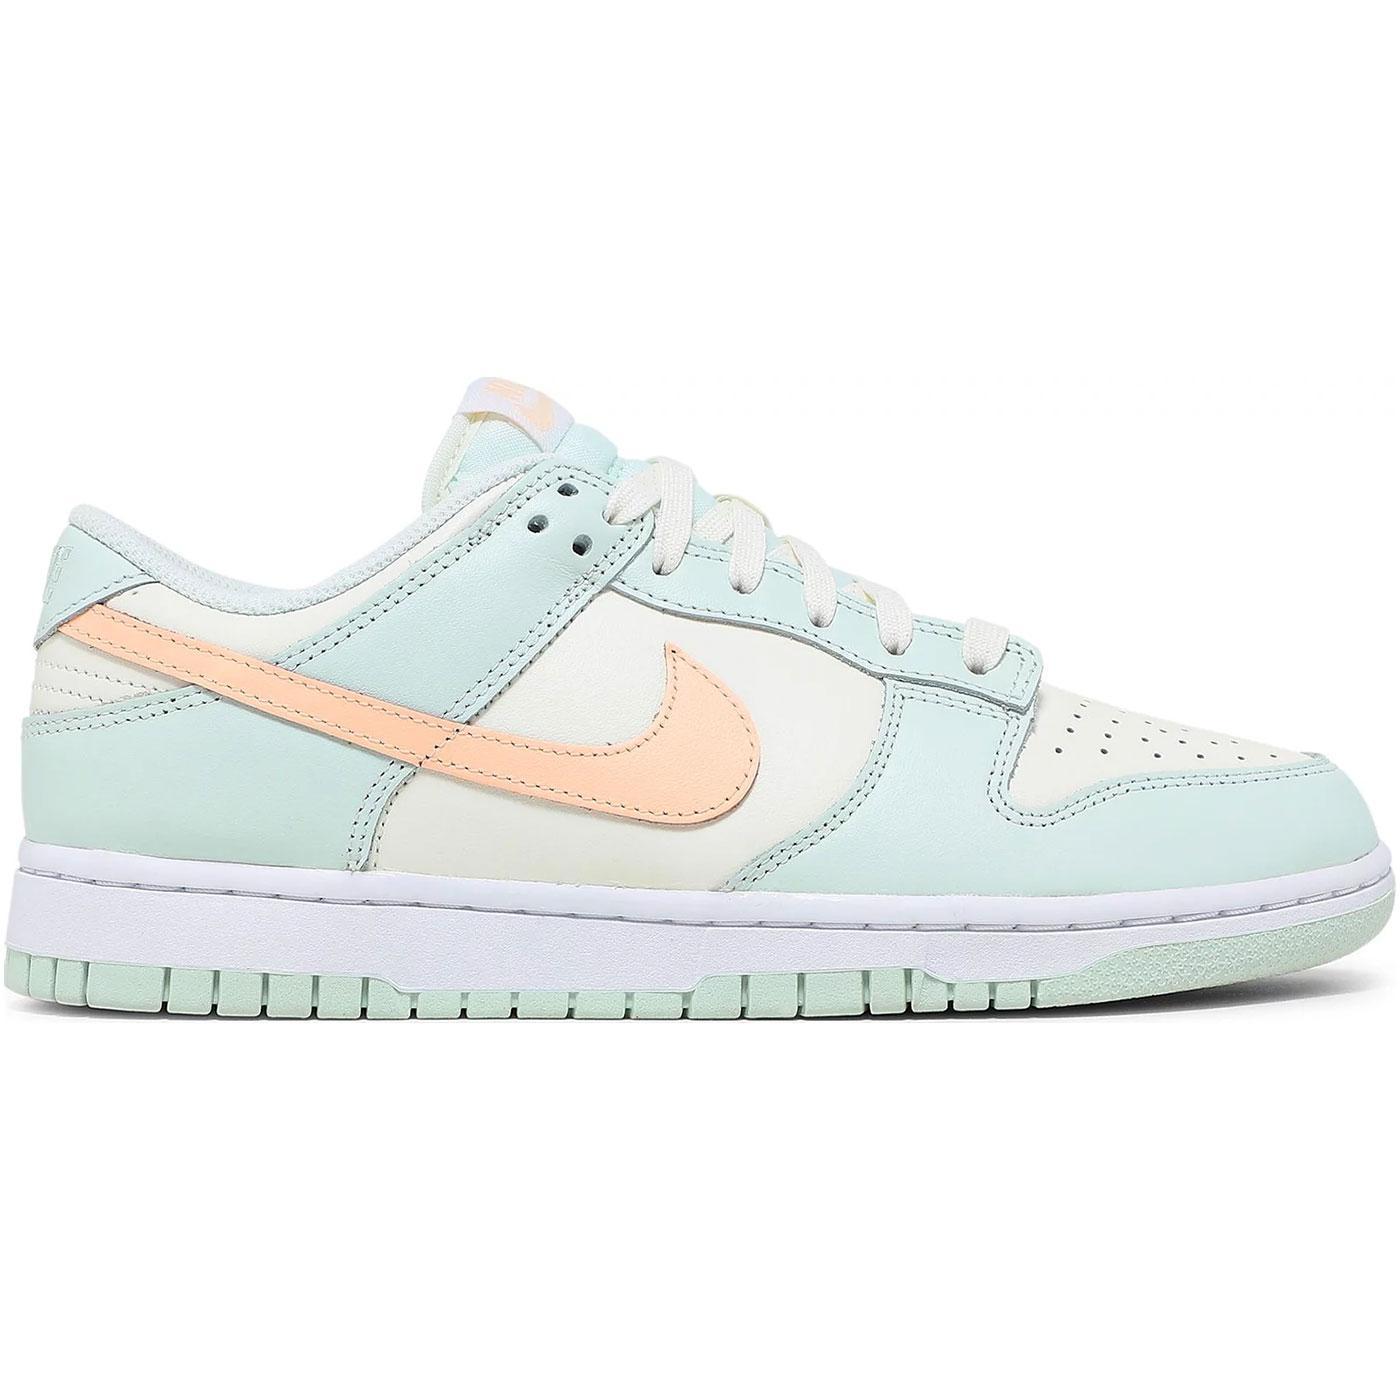 Wmns Dunk Low 'Barely Green' DD1503 104 | Nike